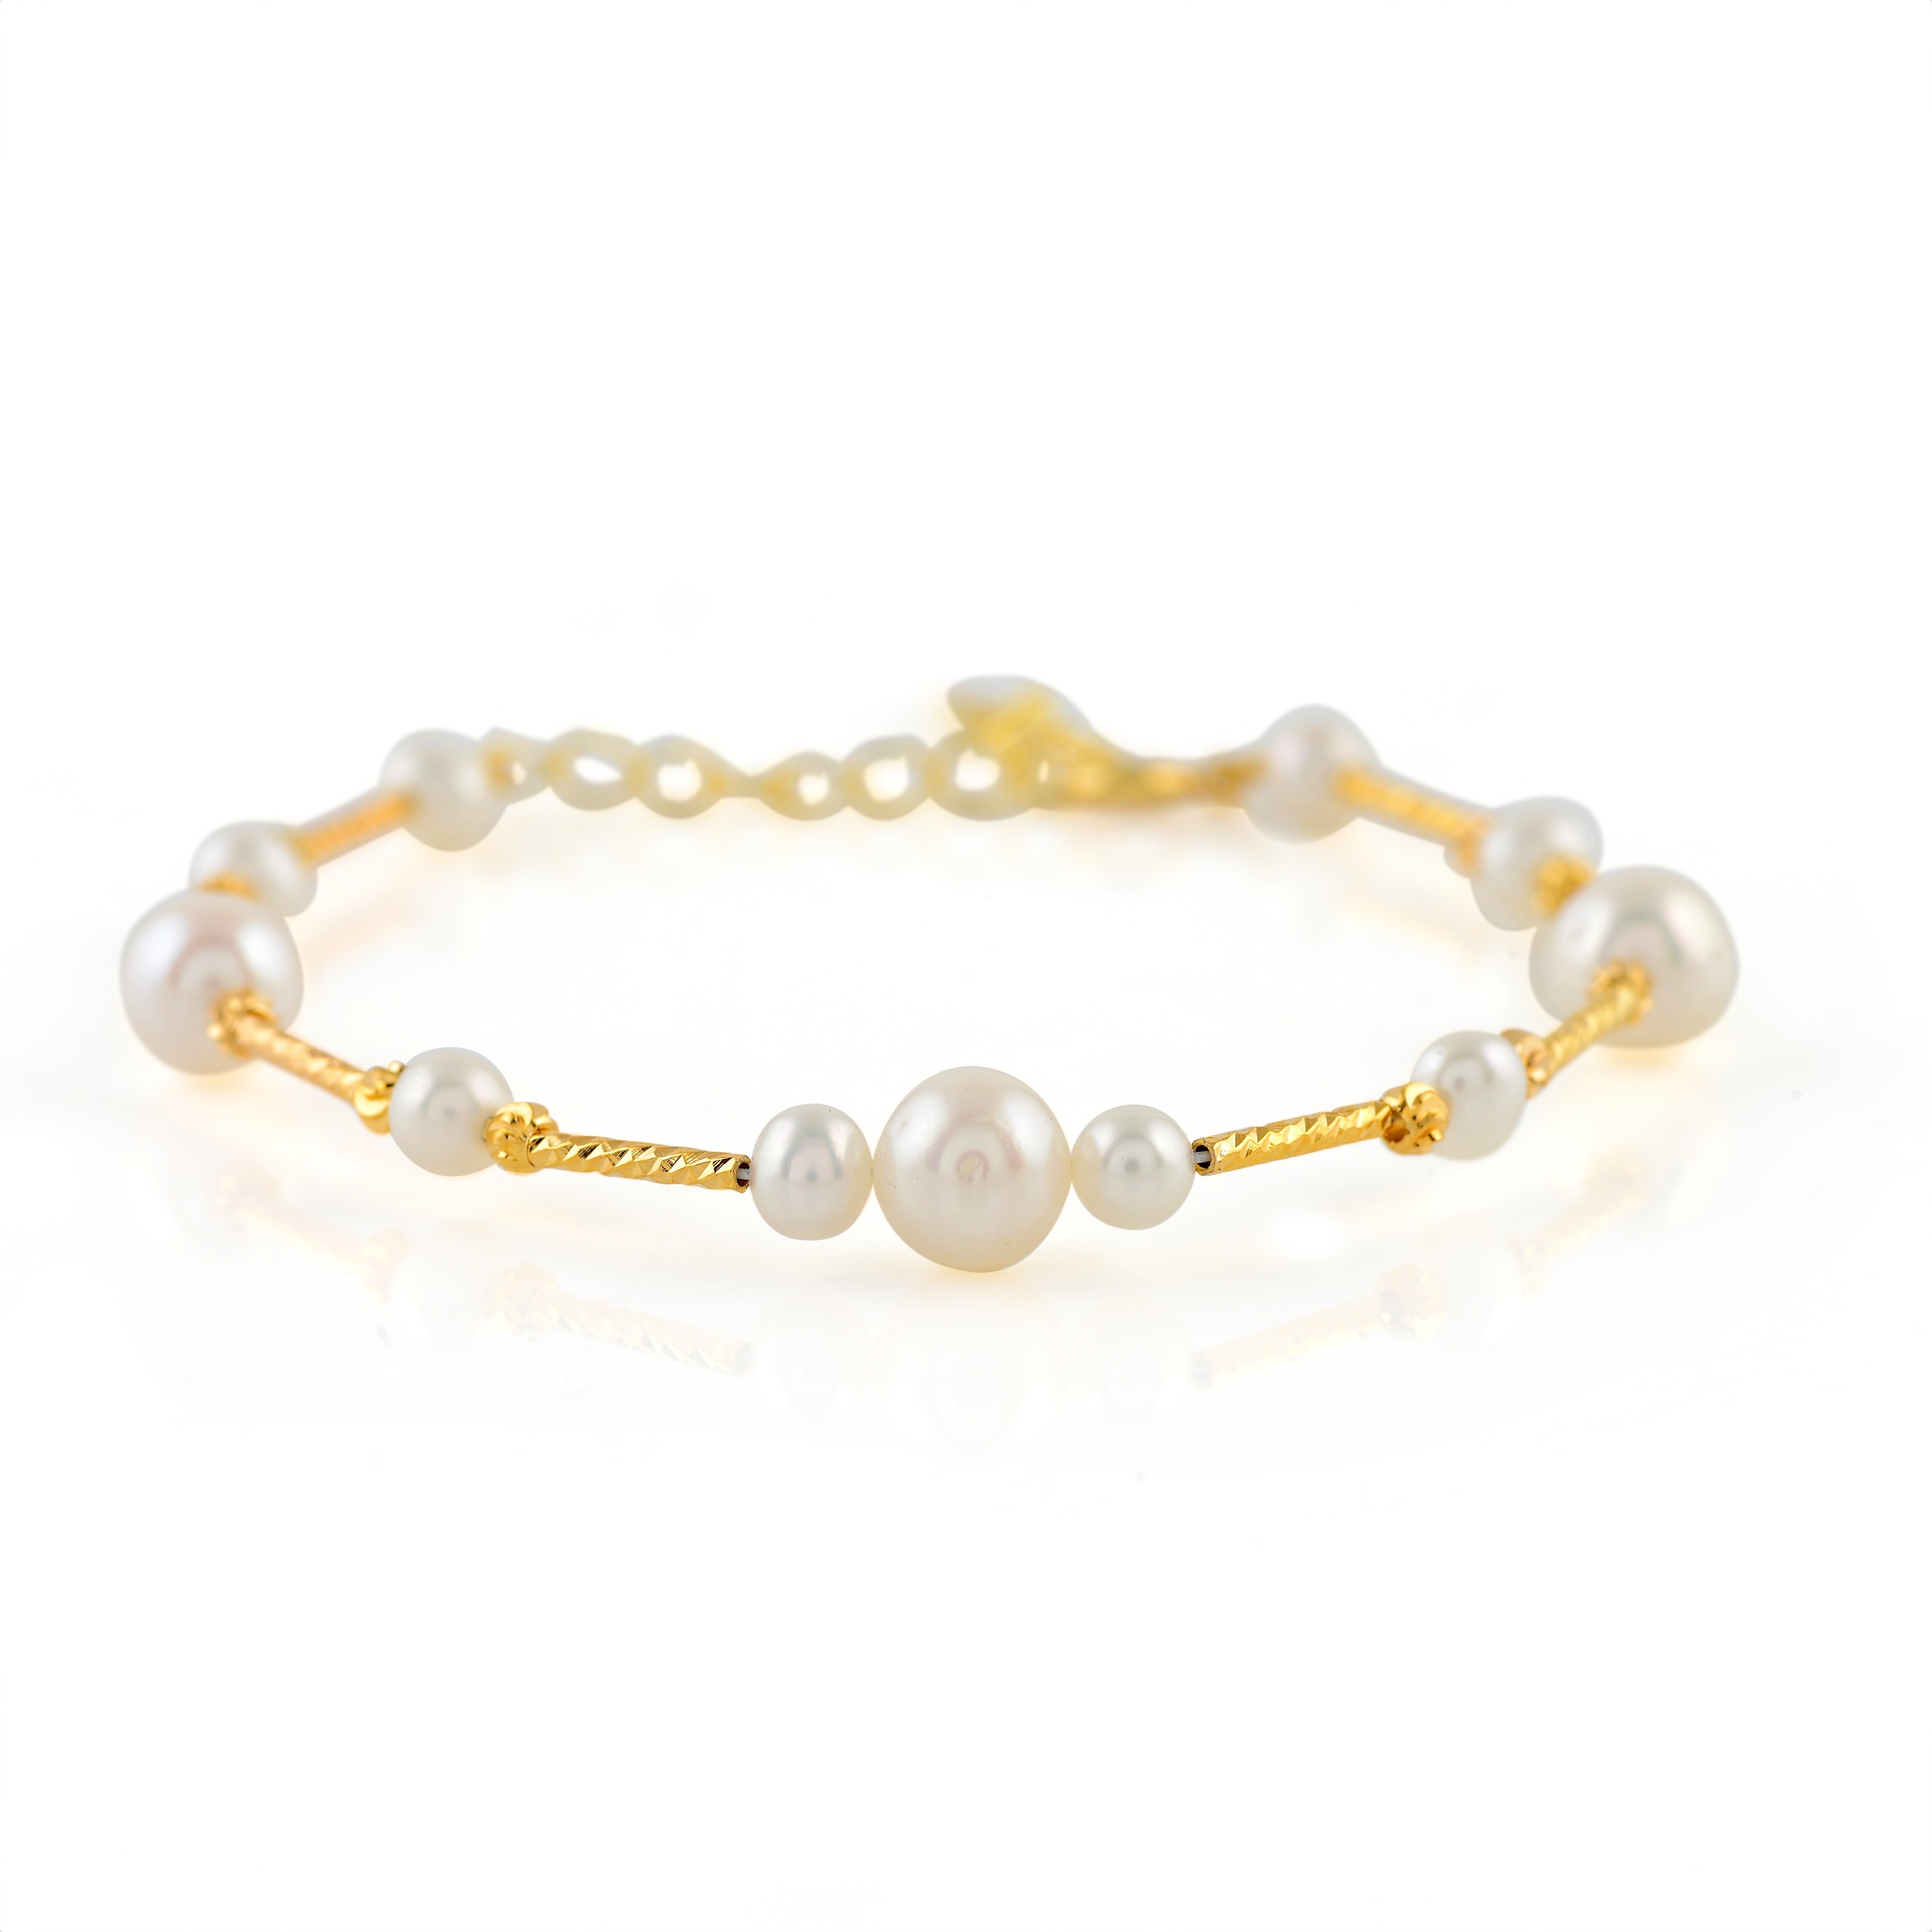 A Bracelet of Pure Radiance White Freshwater Pearls